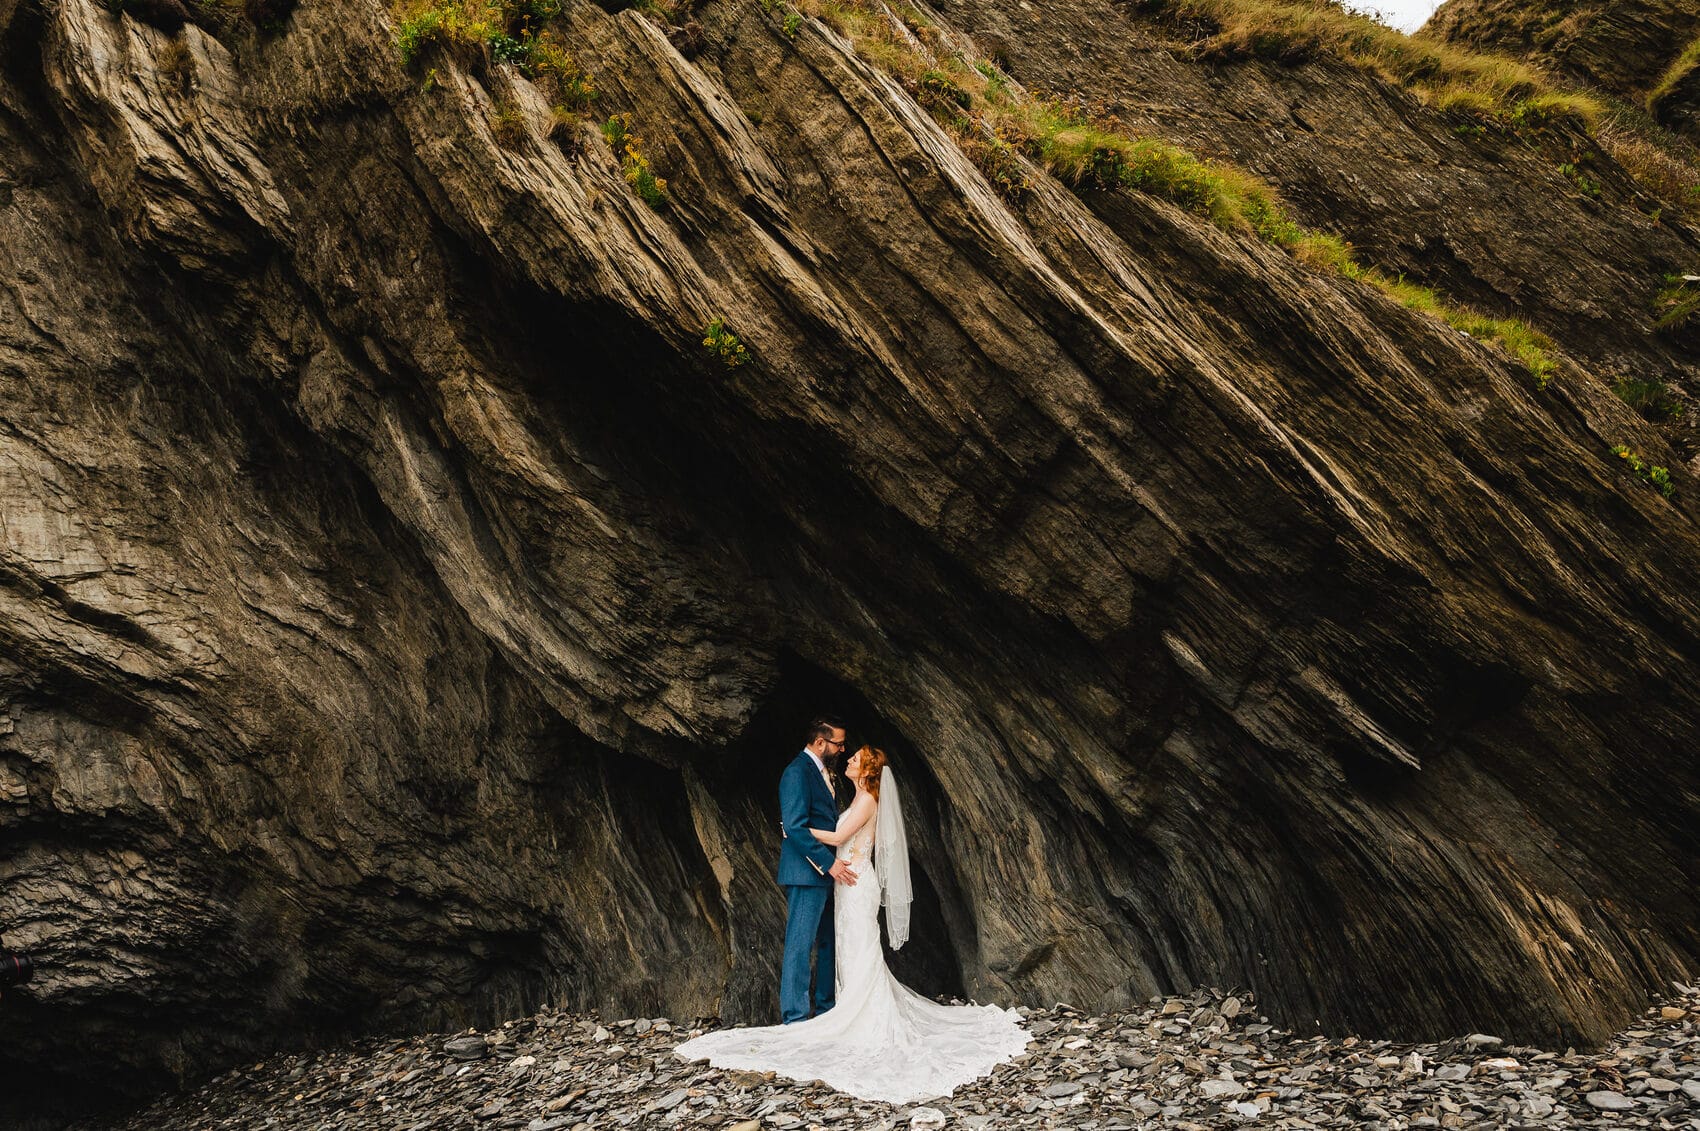 The cliff face and Bride and groom at Tunnels Beaches Wedding venue